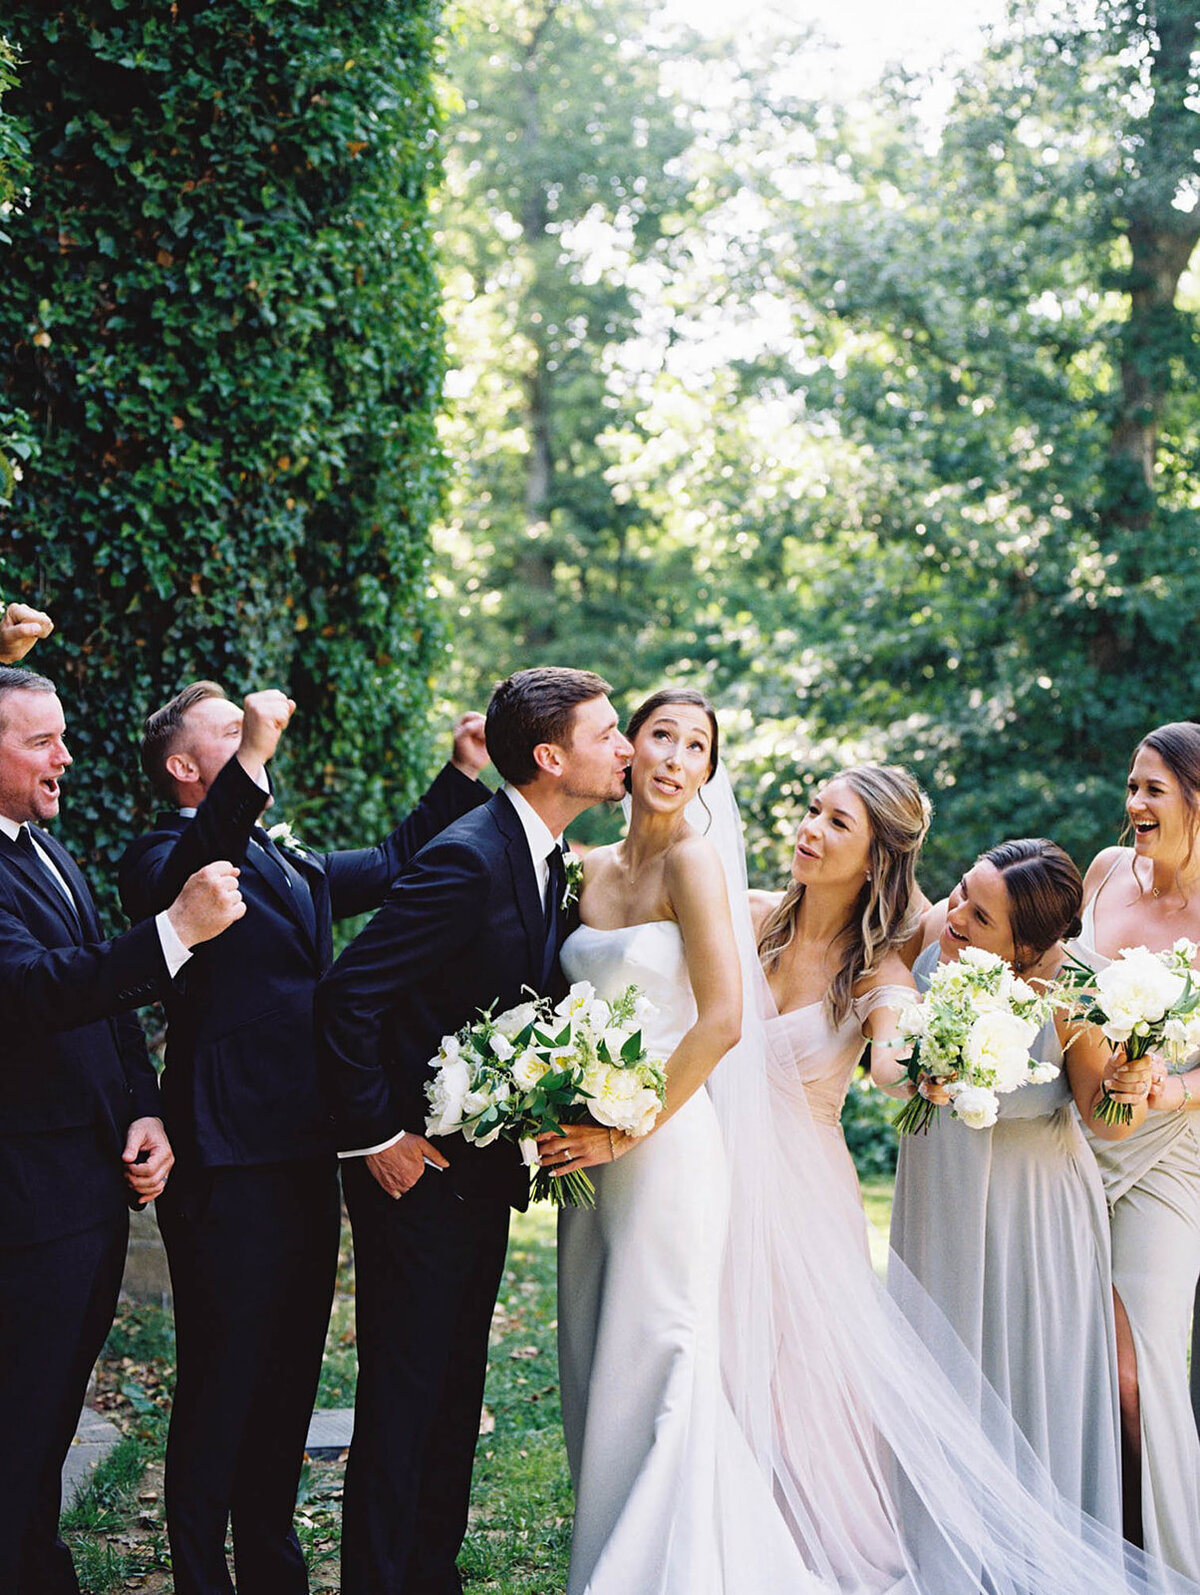 Groom kisses bride and bridal party celebrates